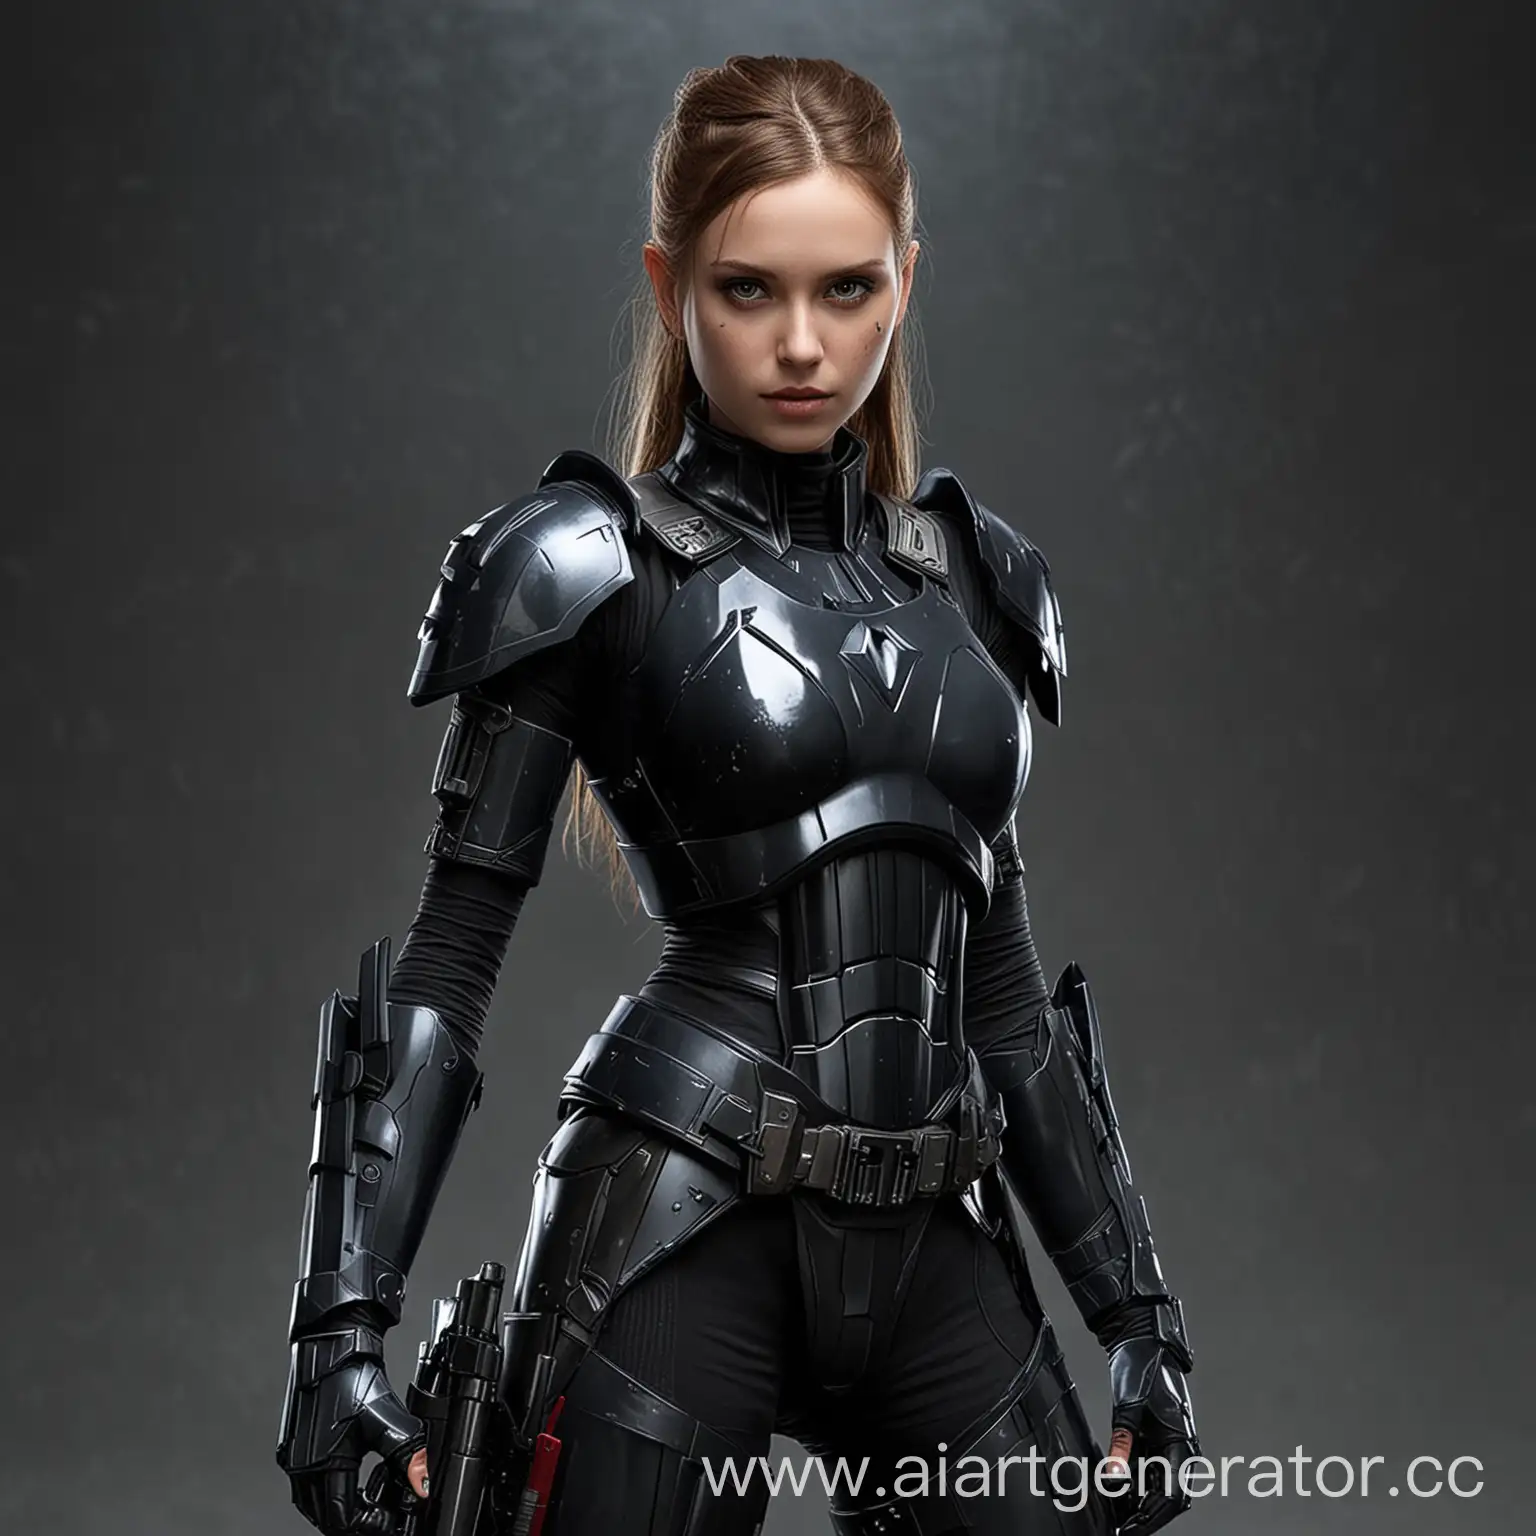 Dark-Armor-Clone-Girl-from-the-Star-Wars-Universe